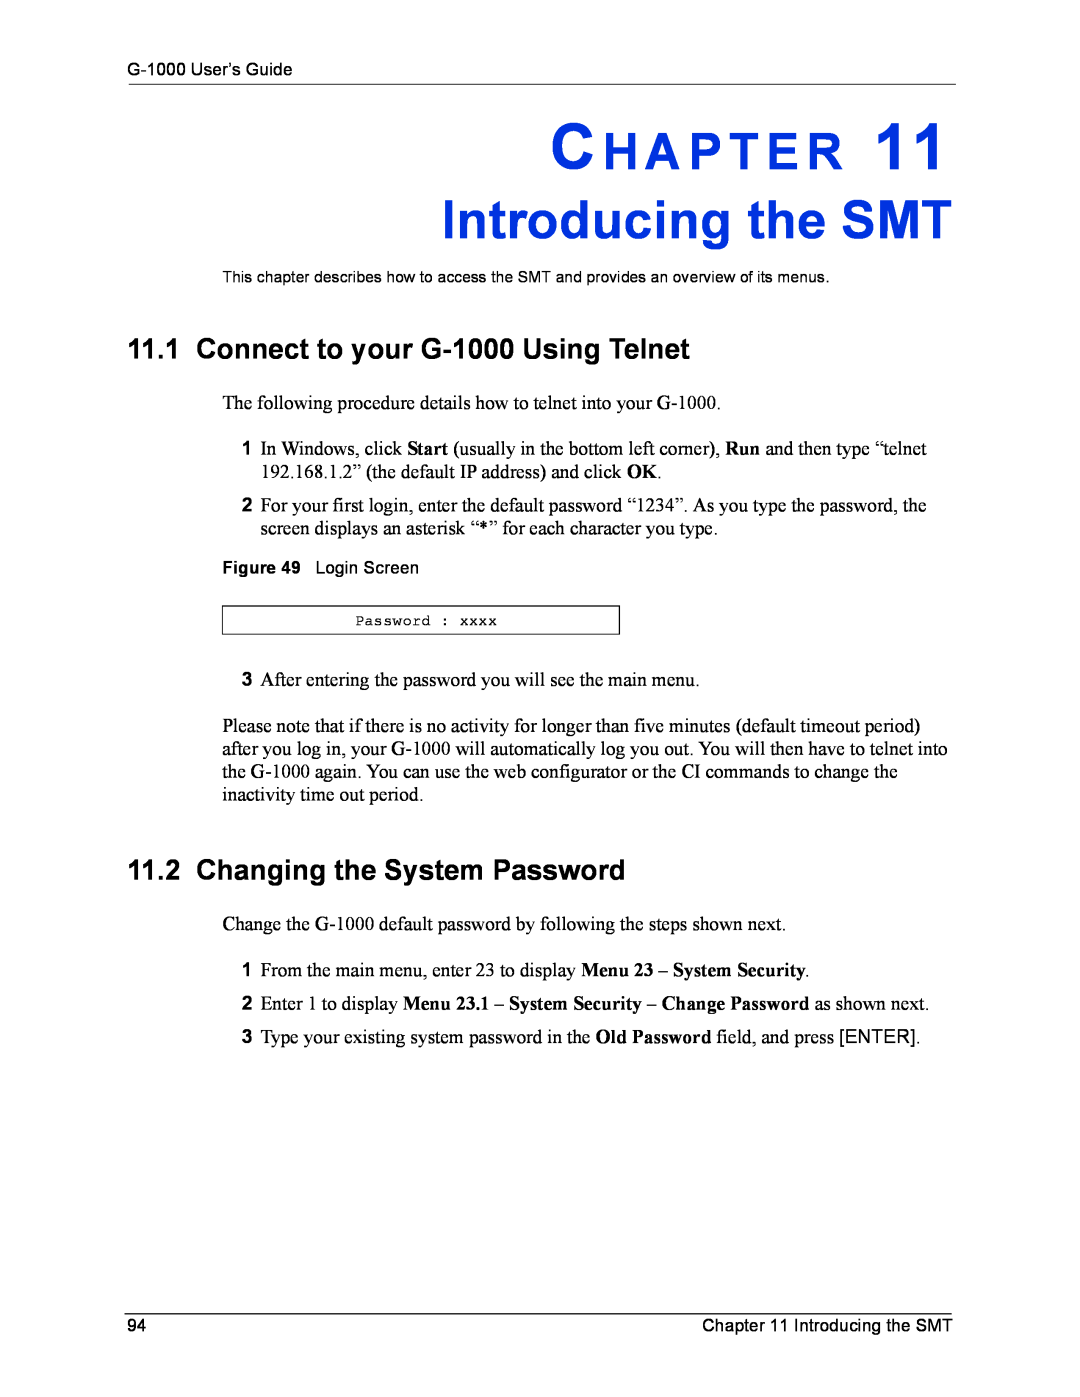 ZyXEL Communications manual Introducing the SMT, Connect to your G-1000 Using Telnet, Changing the System Password 